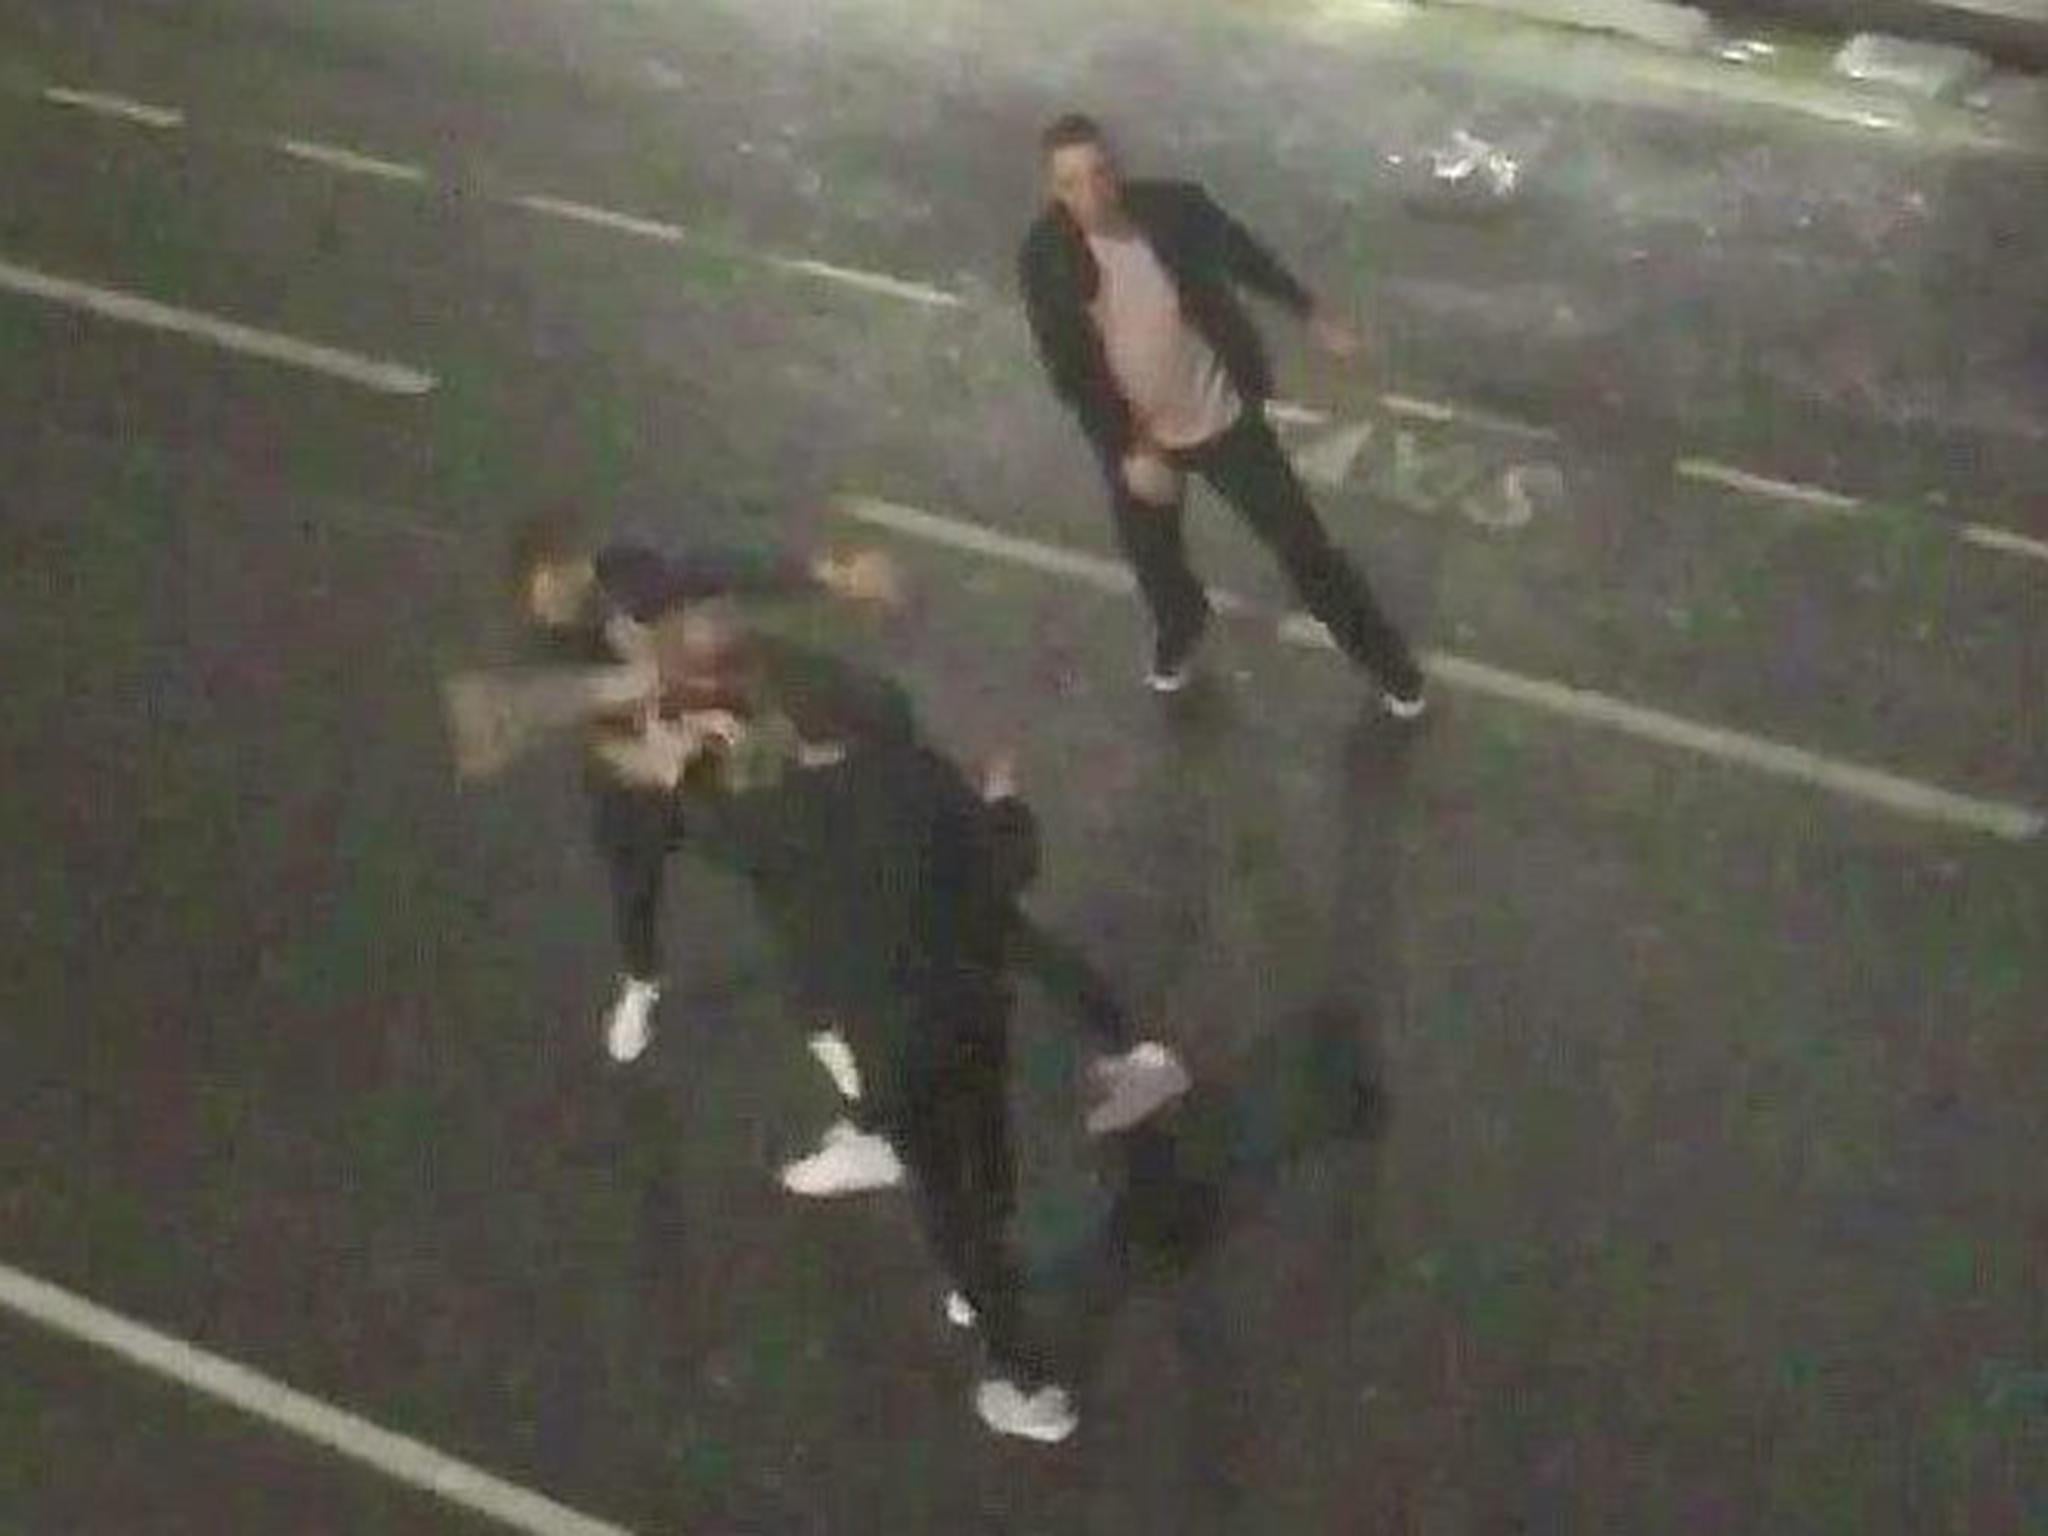 A man alleged to be Stokes appearing to throw a punch